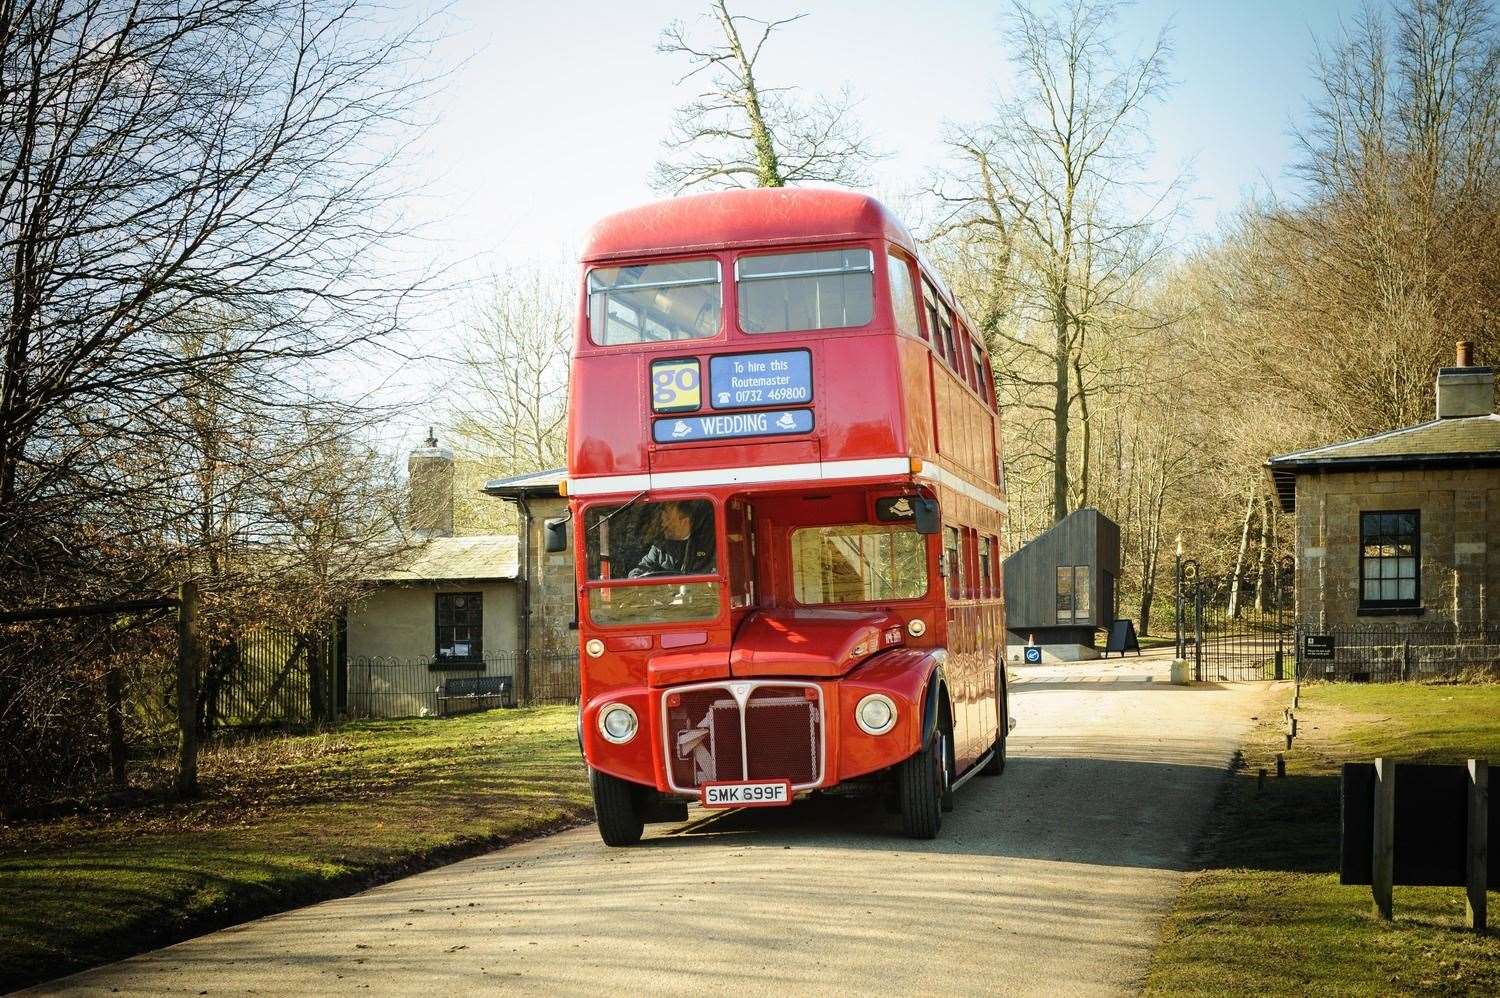 The Vintage Bus Company owns two London Routmasters and a classic black cab